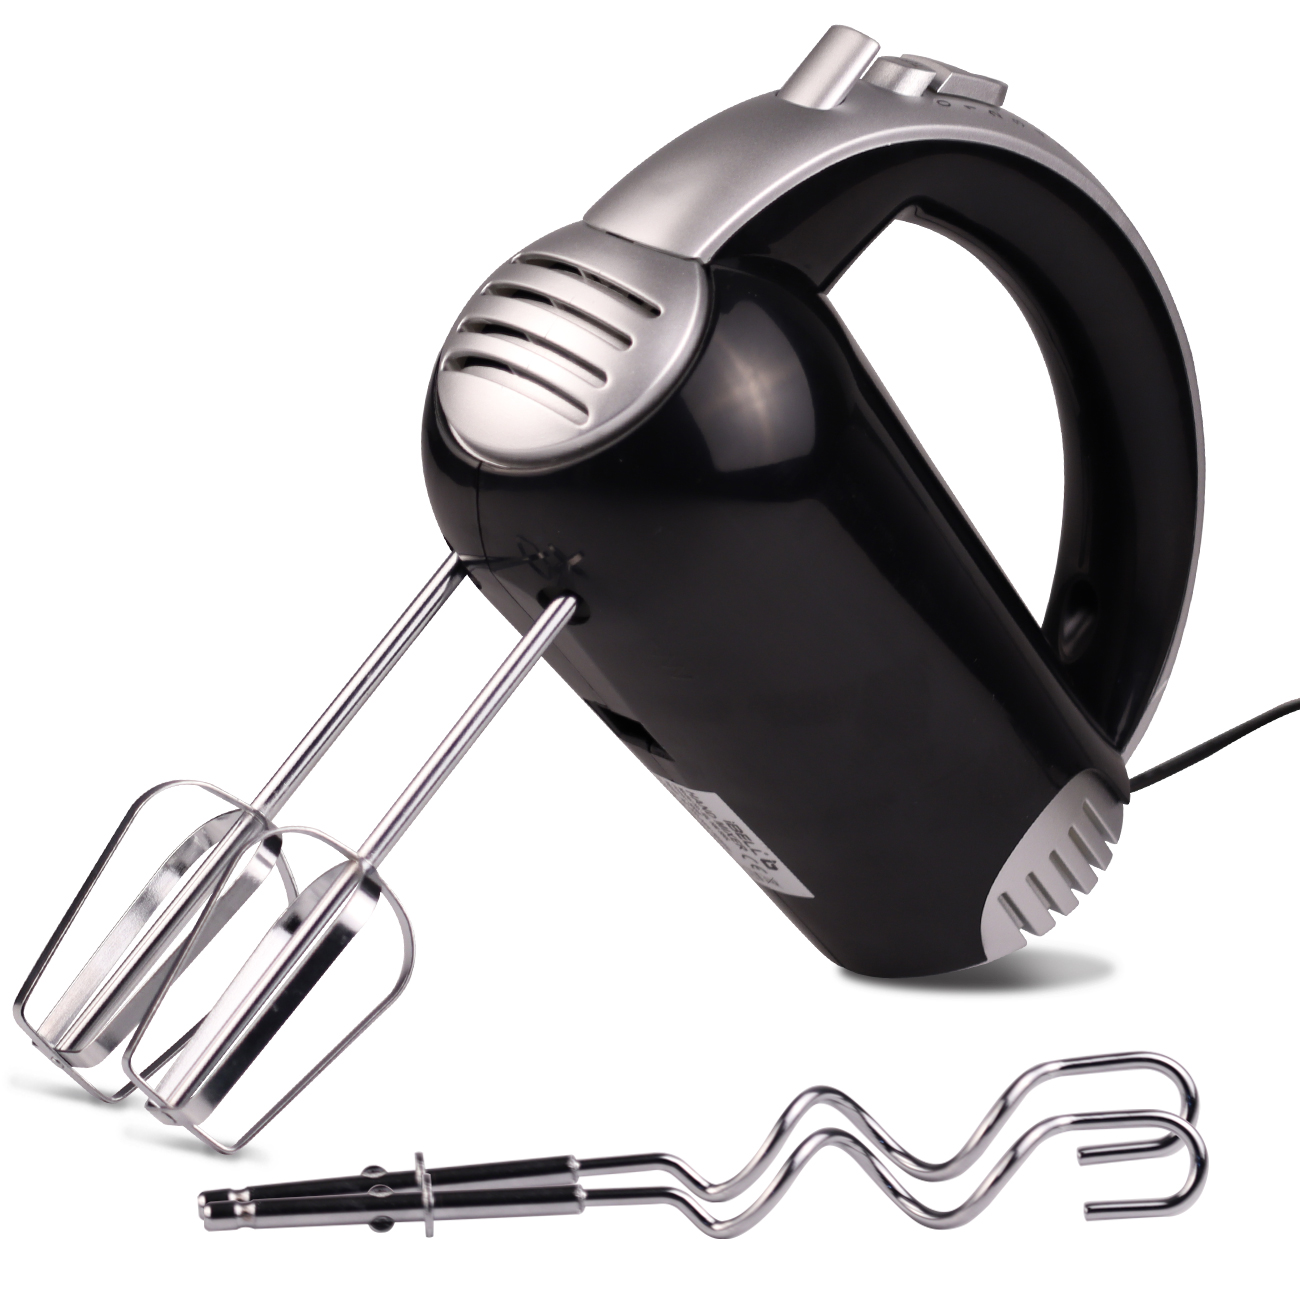 Handy Trendy 7 speed beater 250 W Stand Mixer, Electric Whisk Price in  India - Buy Handy Trendy 7 speed beater 250 W Stand Mixer, Electric Whisk  Online at Flipkart.com